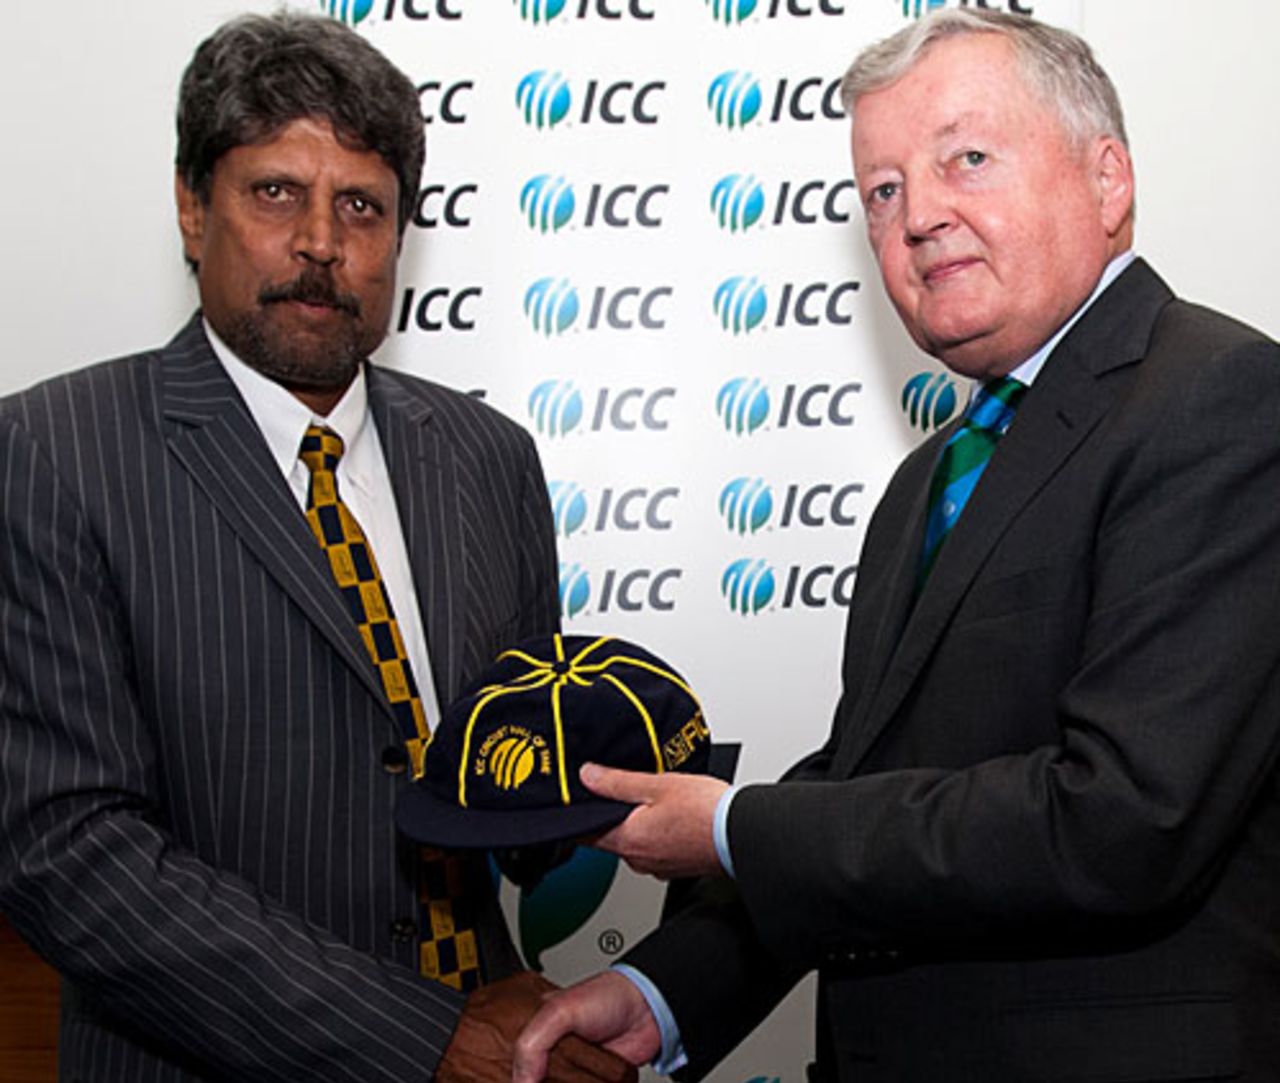 Kapil Dev gets a commemorative cap from David Morgan after being inducted into the ICC Hall of Fame, Dubai, March 9, 2010